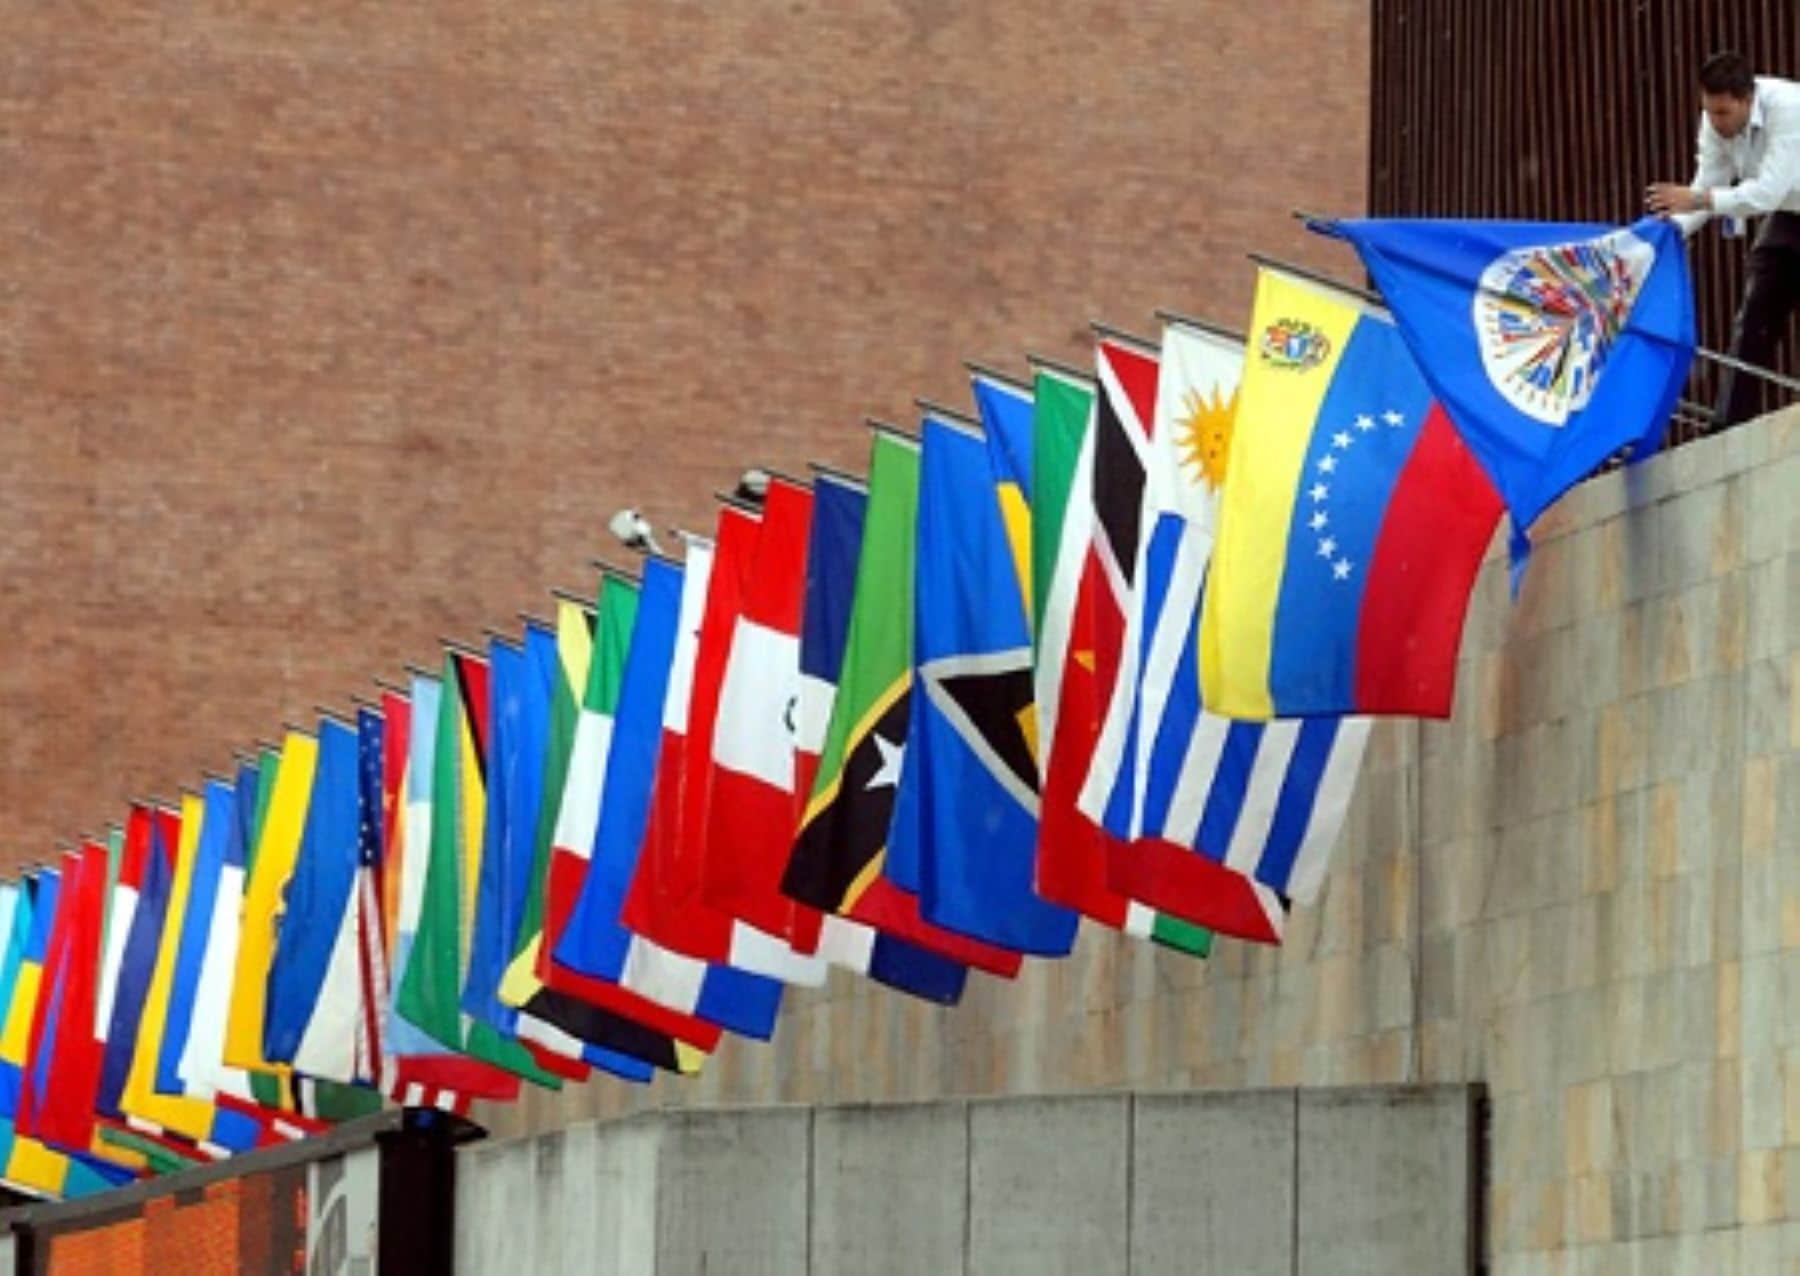 Line of Latin American and Caribbean countries flags along with the Organization of American State flag, File photo.